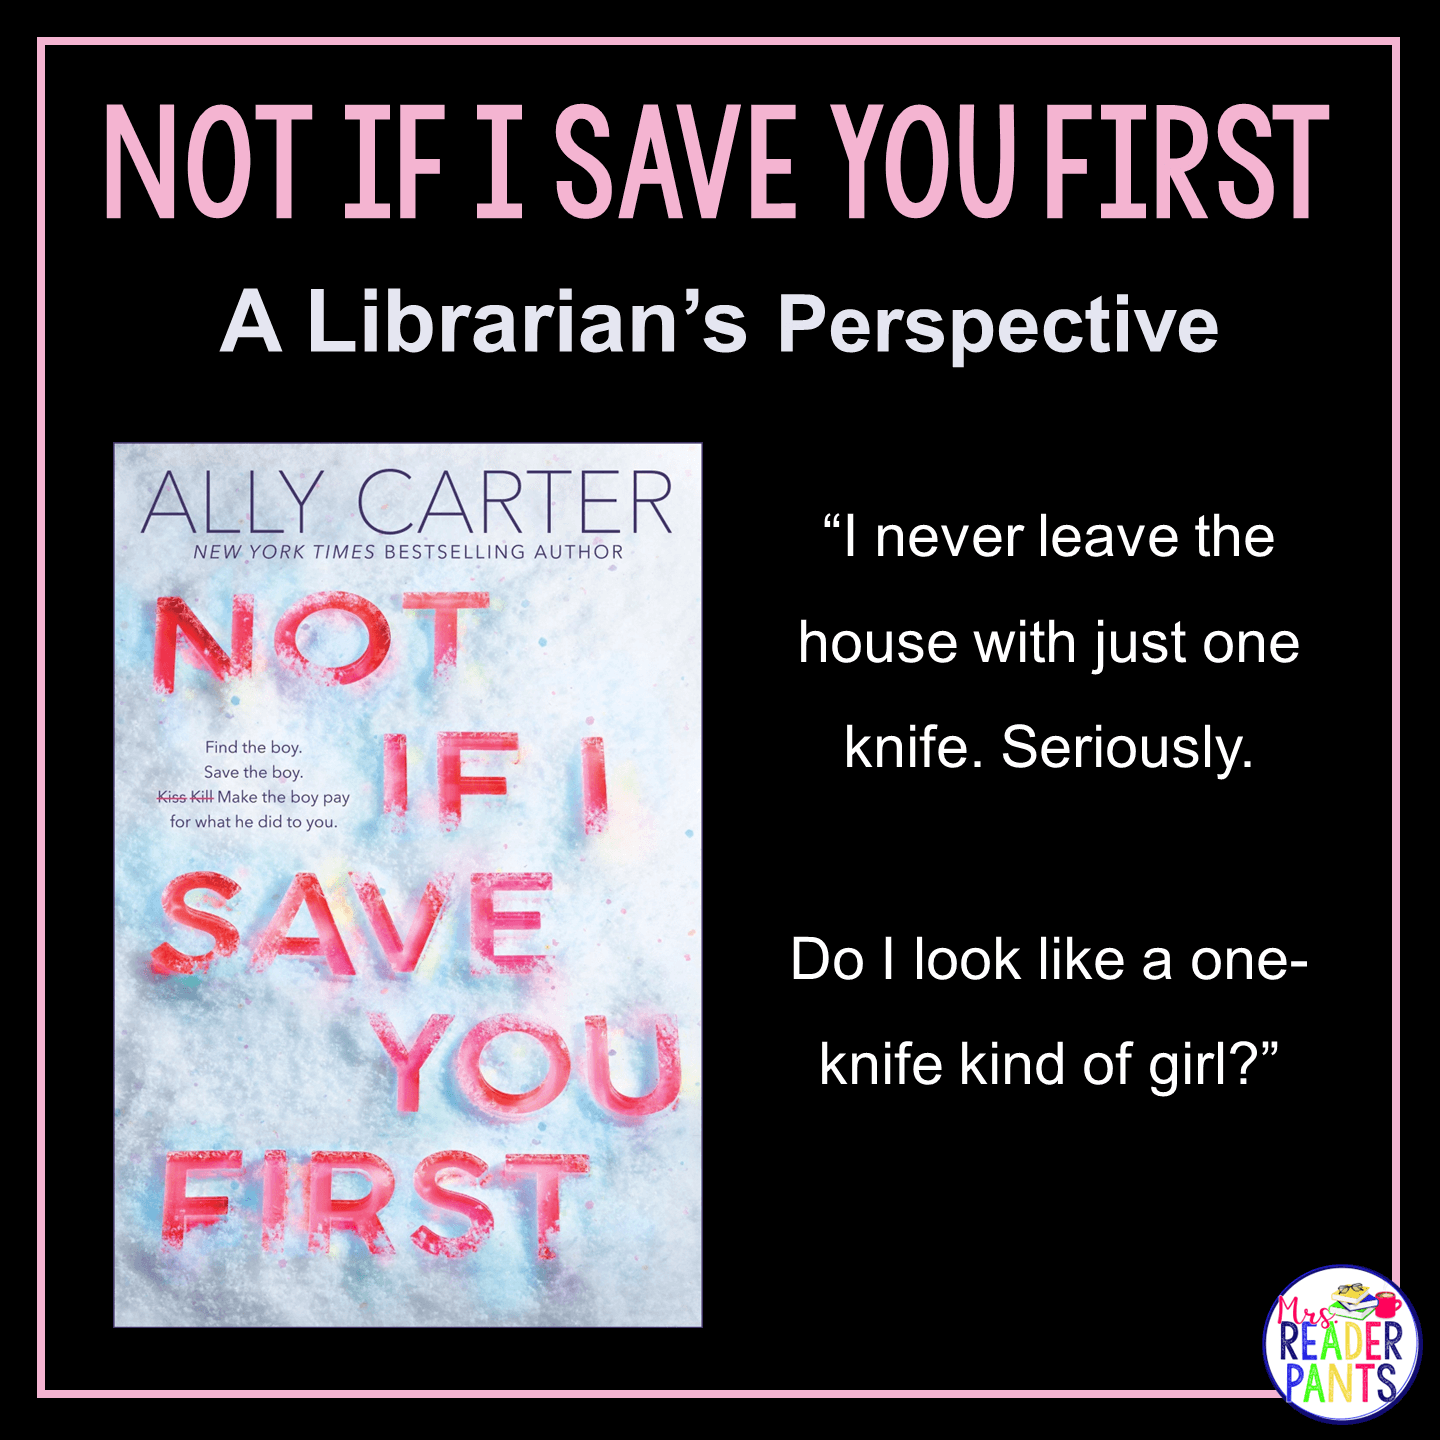 This is a librarian's review of the YA adventure novel Not If I Save You First by Ally Carter.